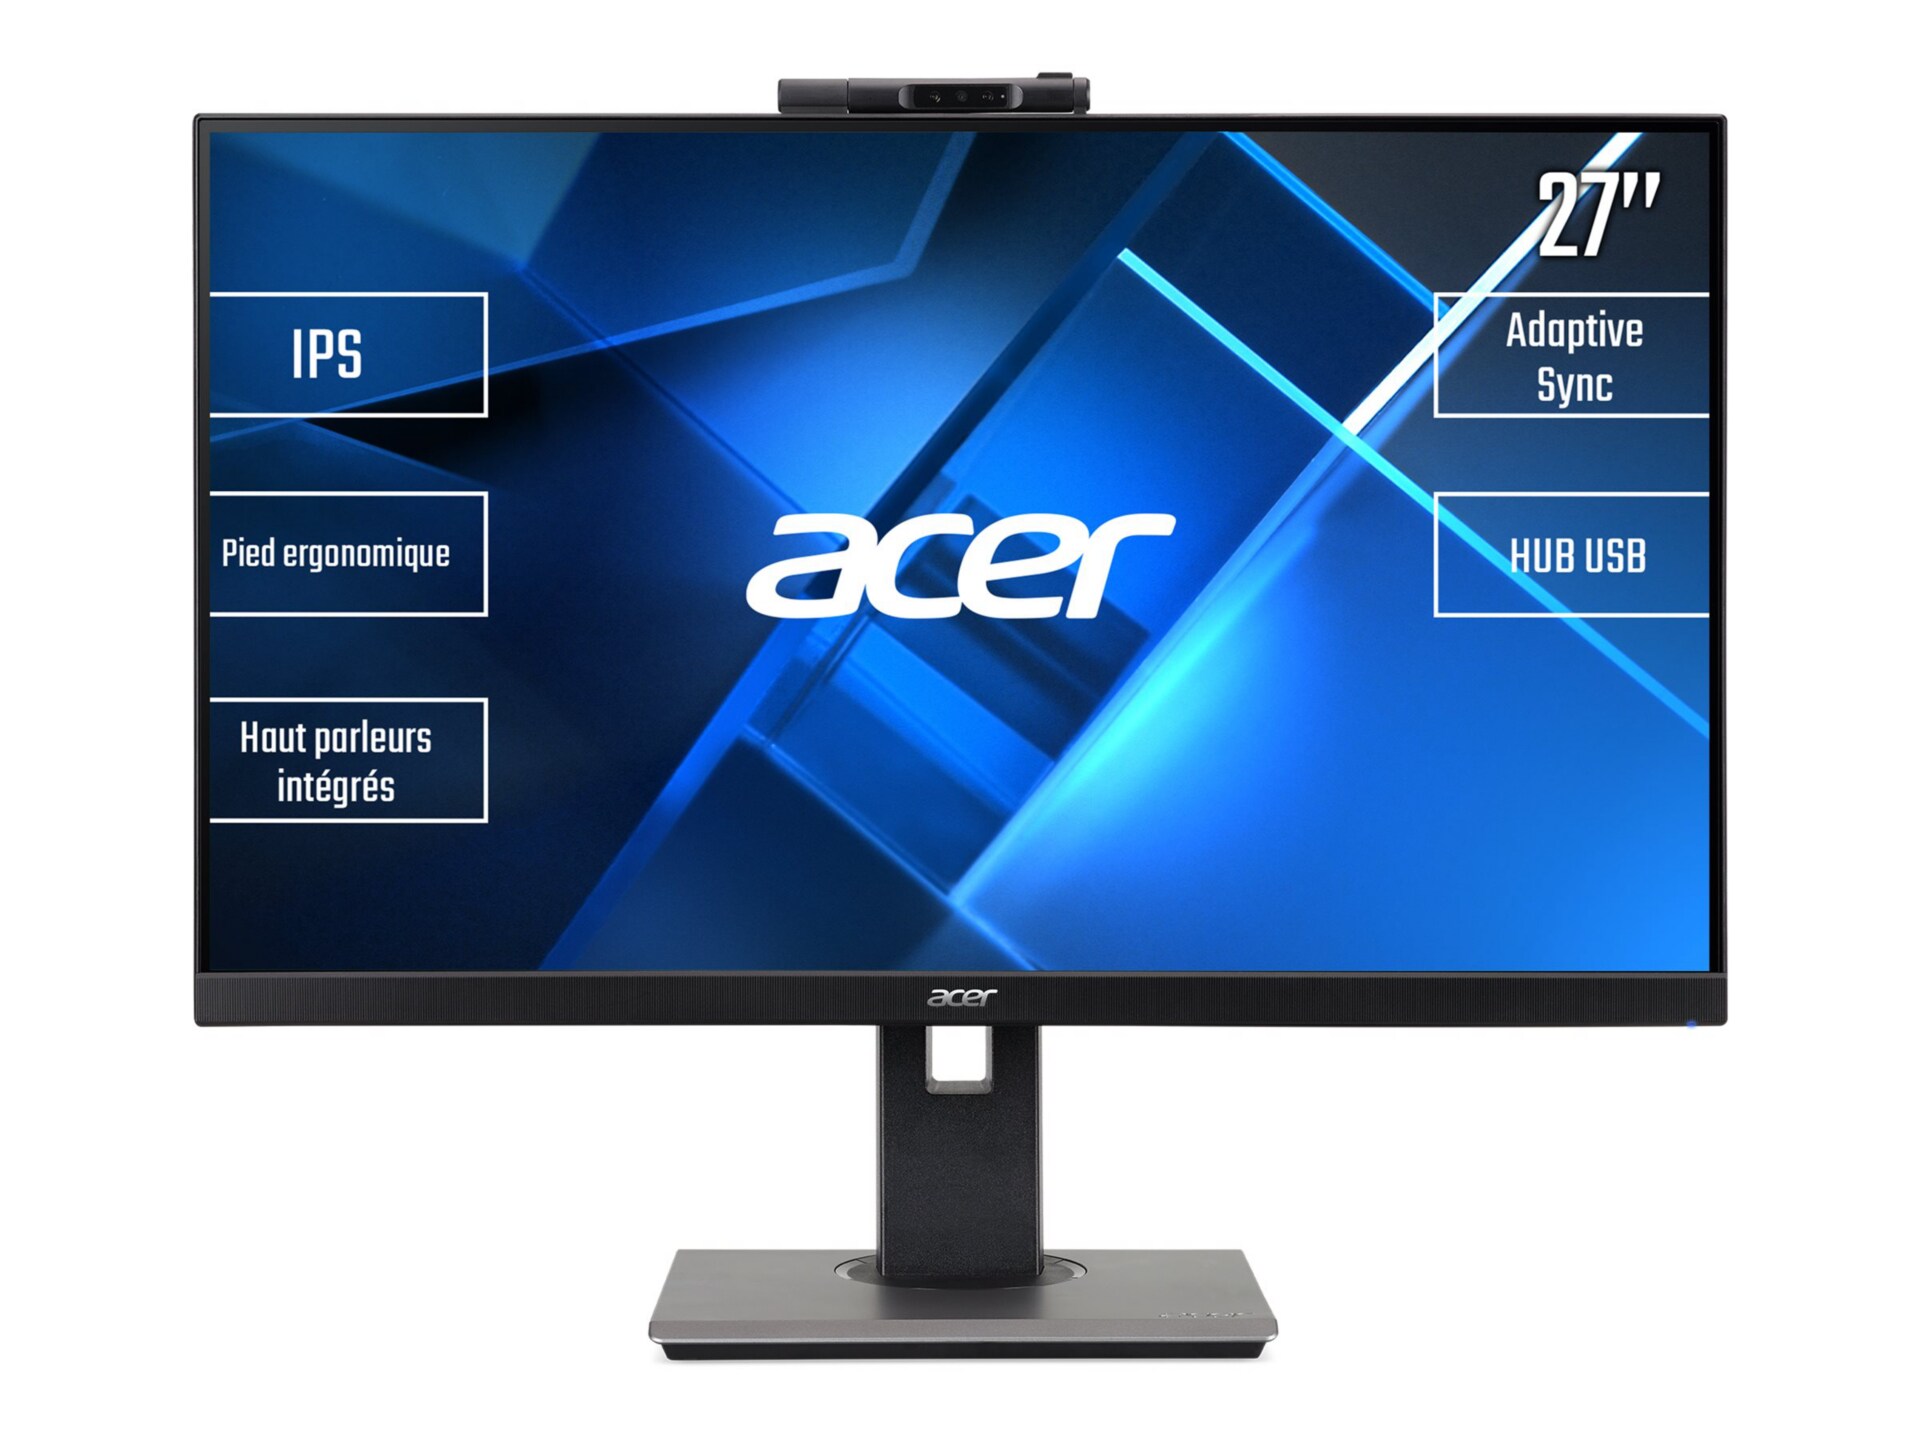 Acer B277 Dbmiprczx - B7 Series - LED monitor - Full HD (1080p) - 27"